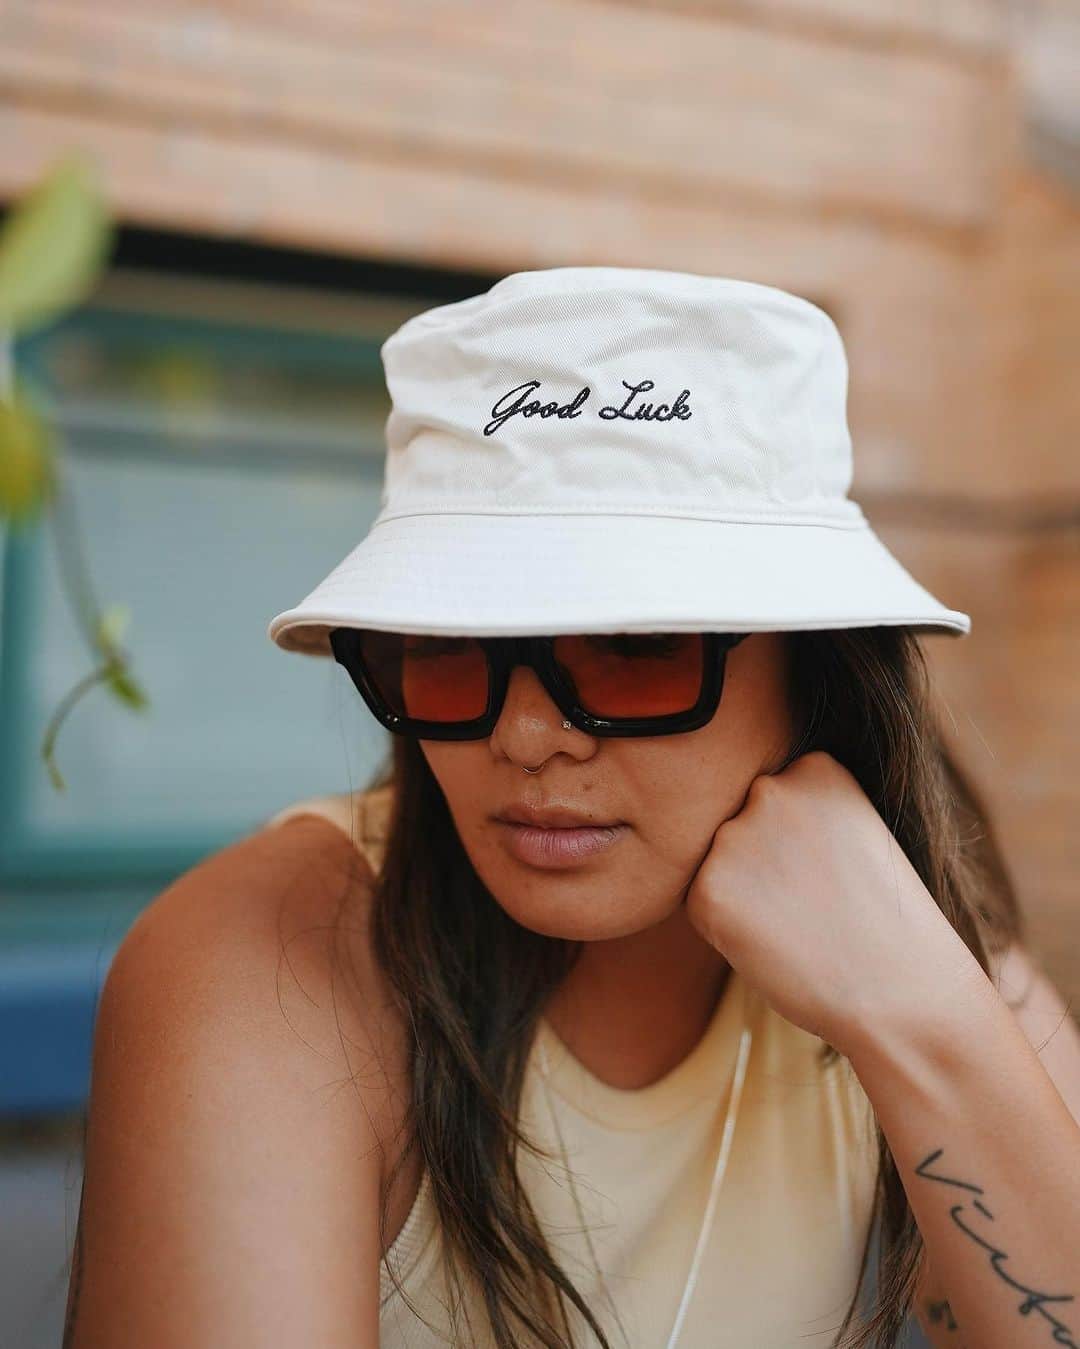 Stumptown Coffee Roastersのインスタグラム：「This Good Luck bucket hat is SOLD OUT on our website, but there are still a few left for sale in our Stumptown cafes — swing by and grab yours today! 🤞🧲❤️」